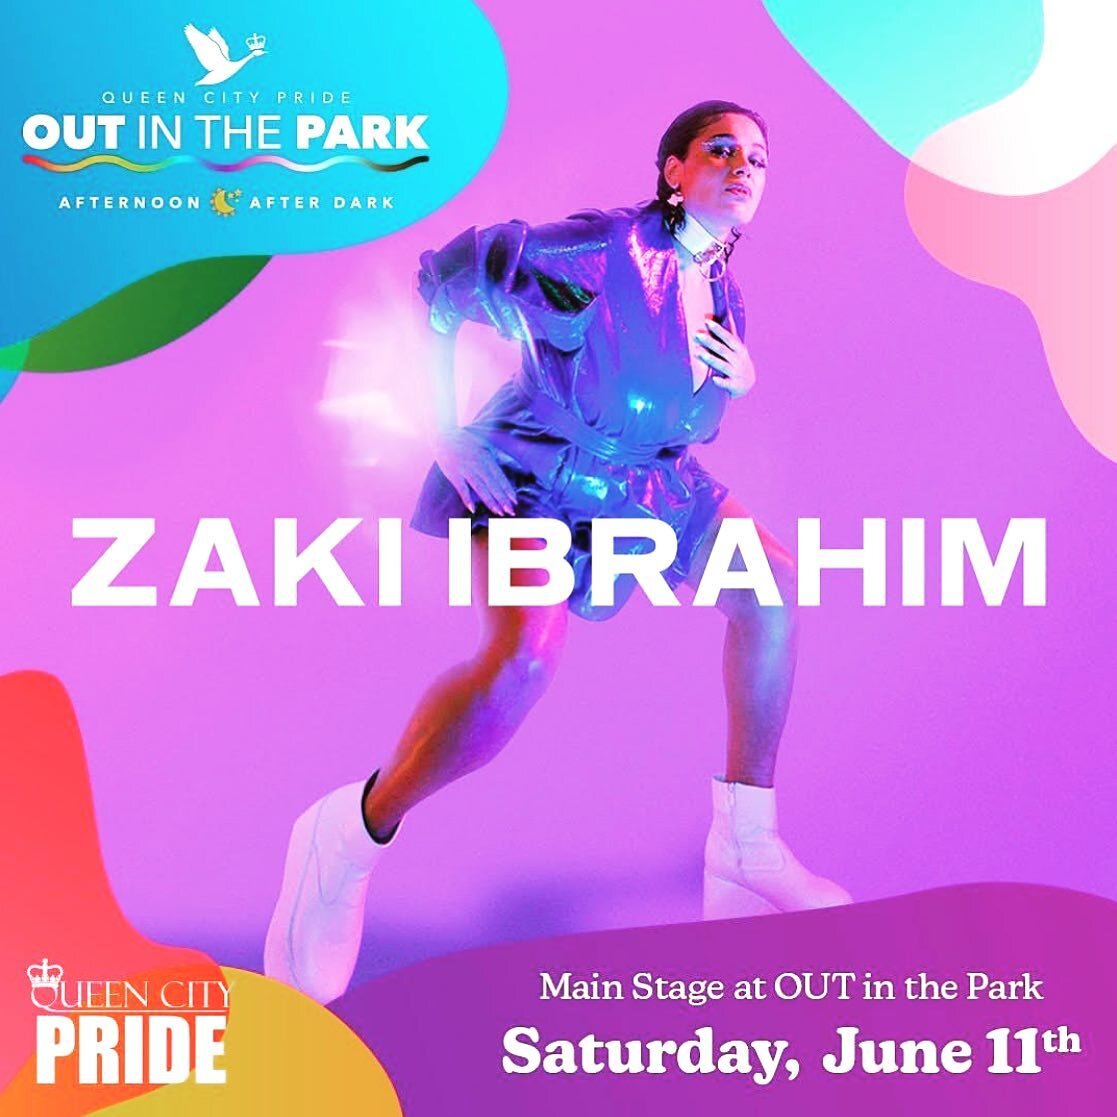 Very excited to be headlining @queencitypride #outinthepark in Regina this weekend with @zatakiwon 🤠 let&rsquo;s gooooo